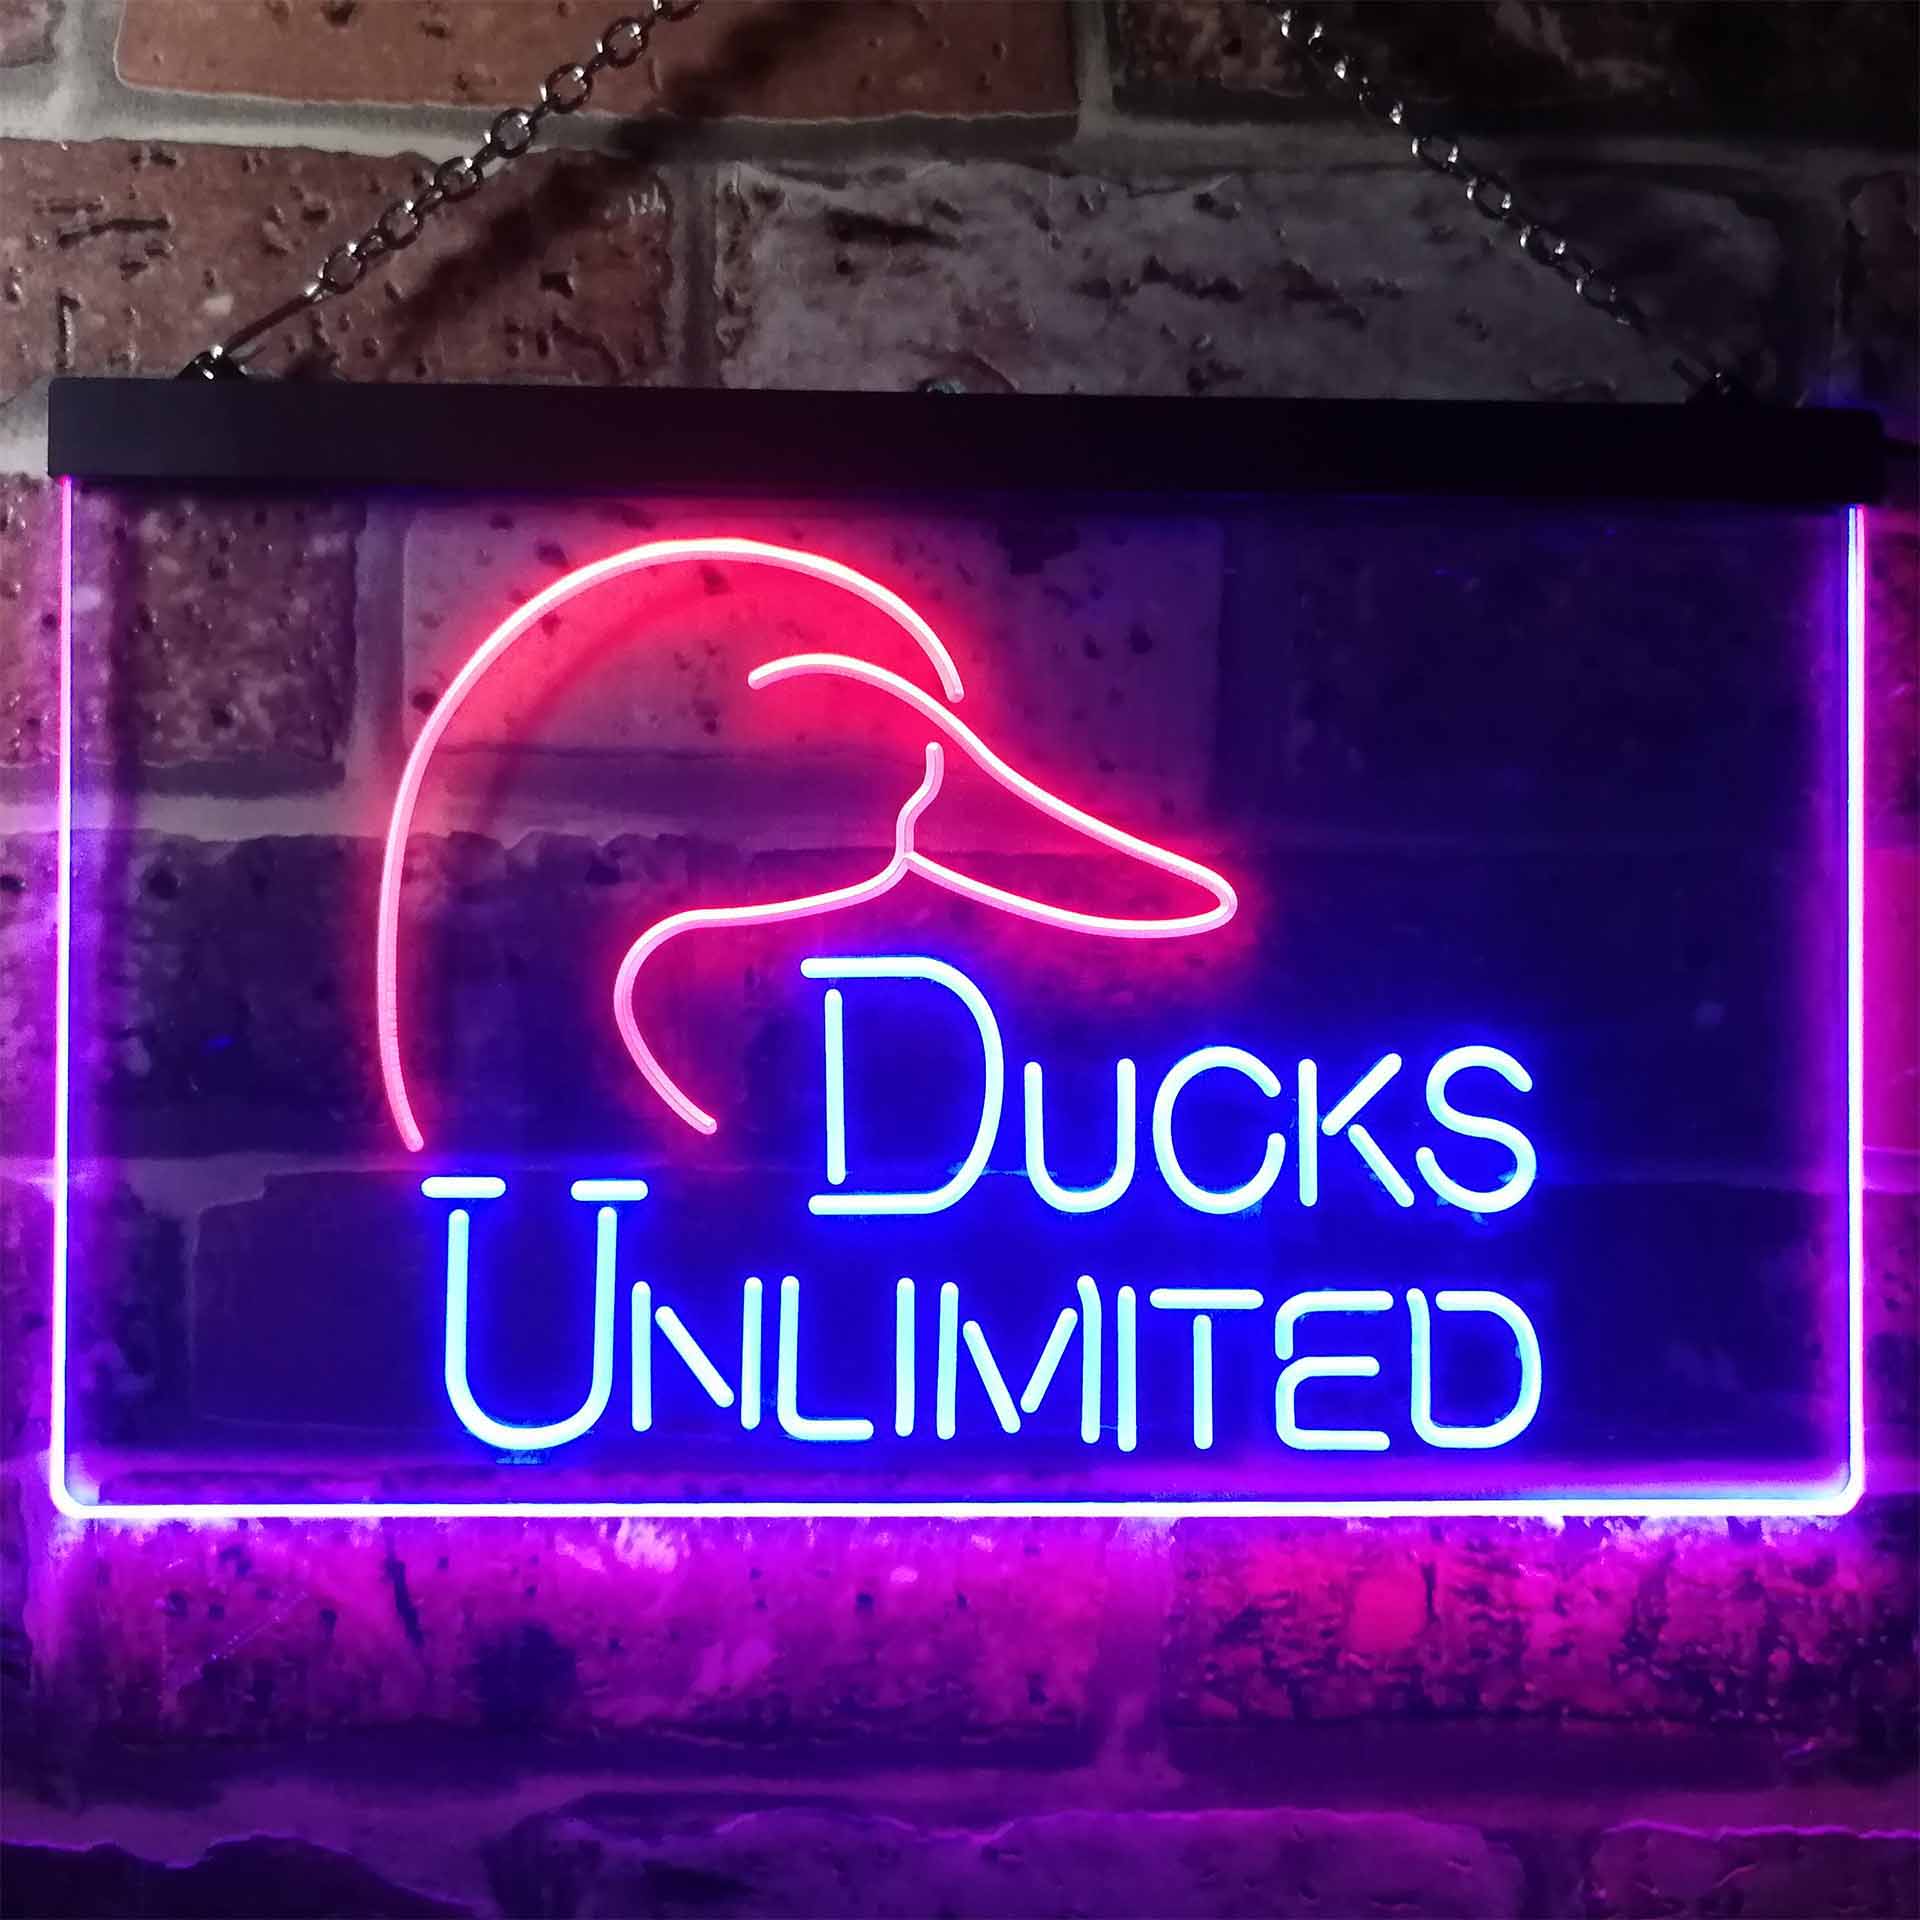 Ducks Unlimited Club LED Neon Sign